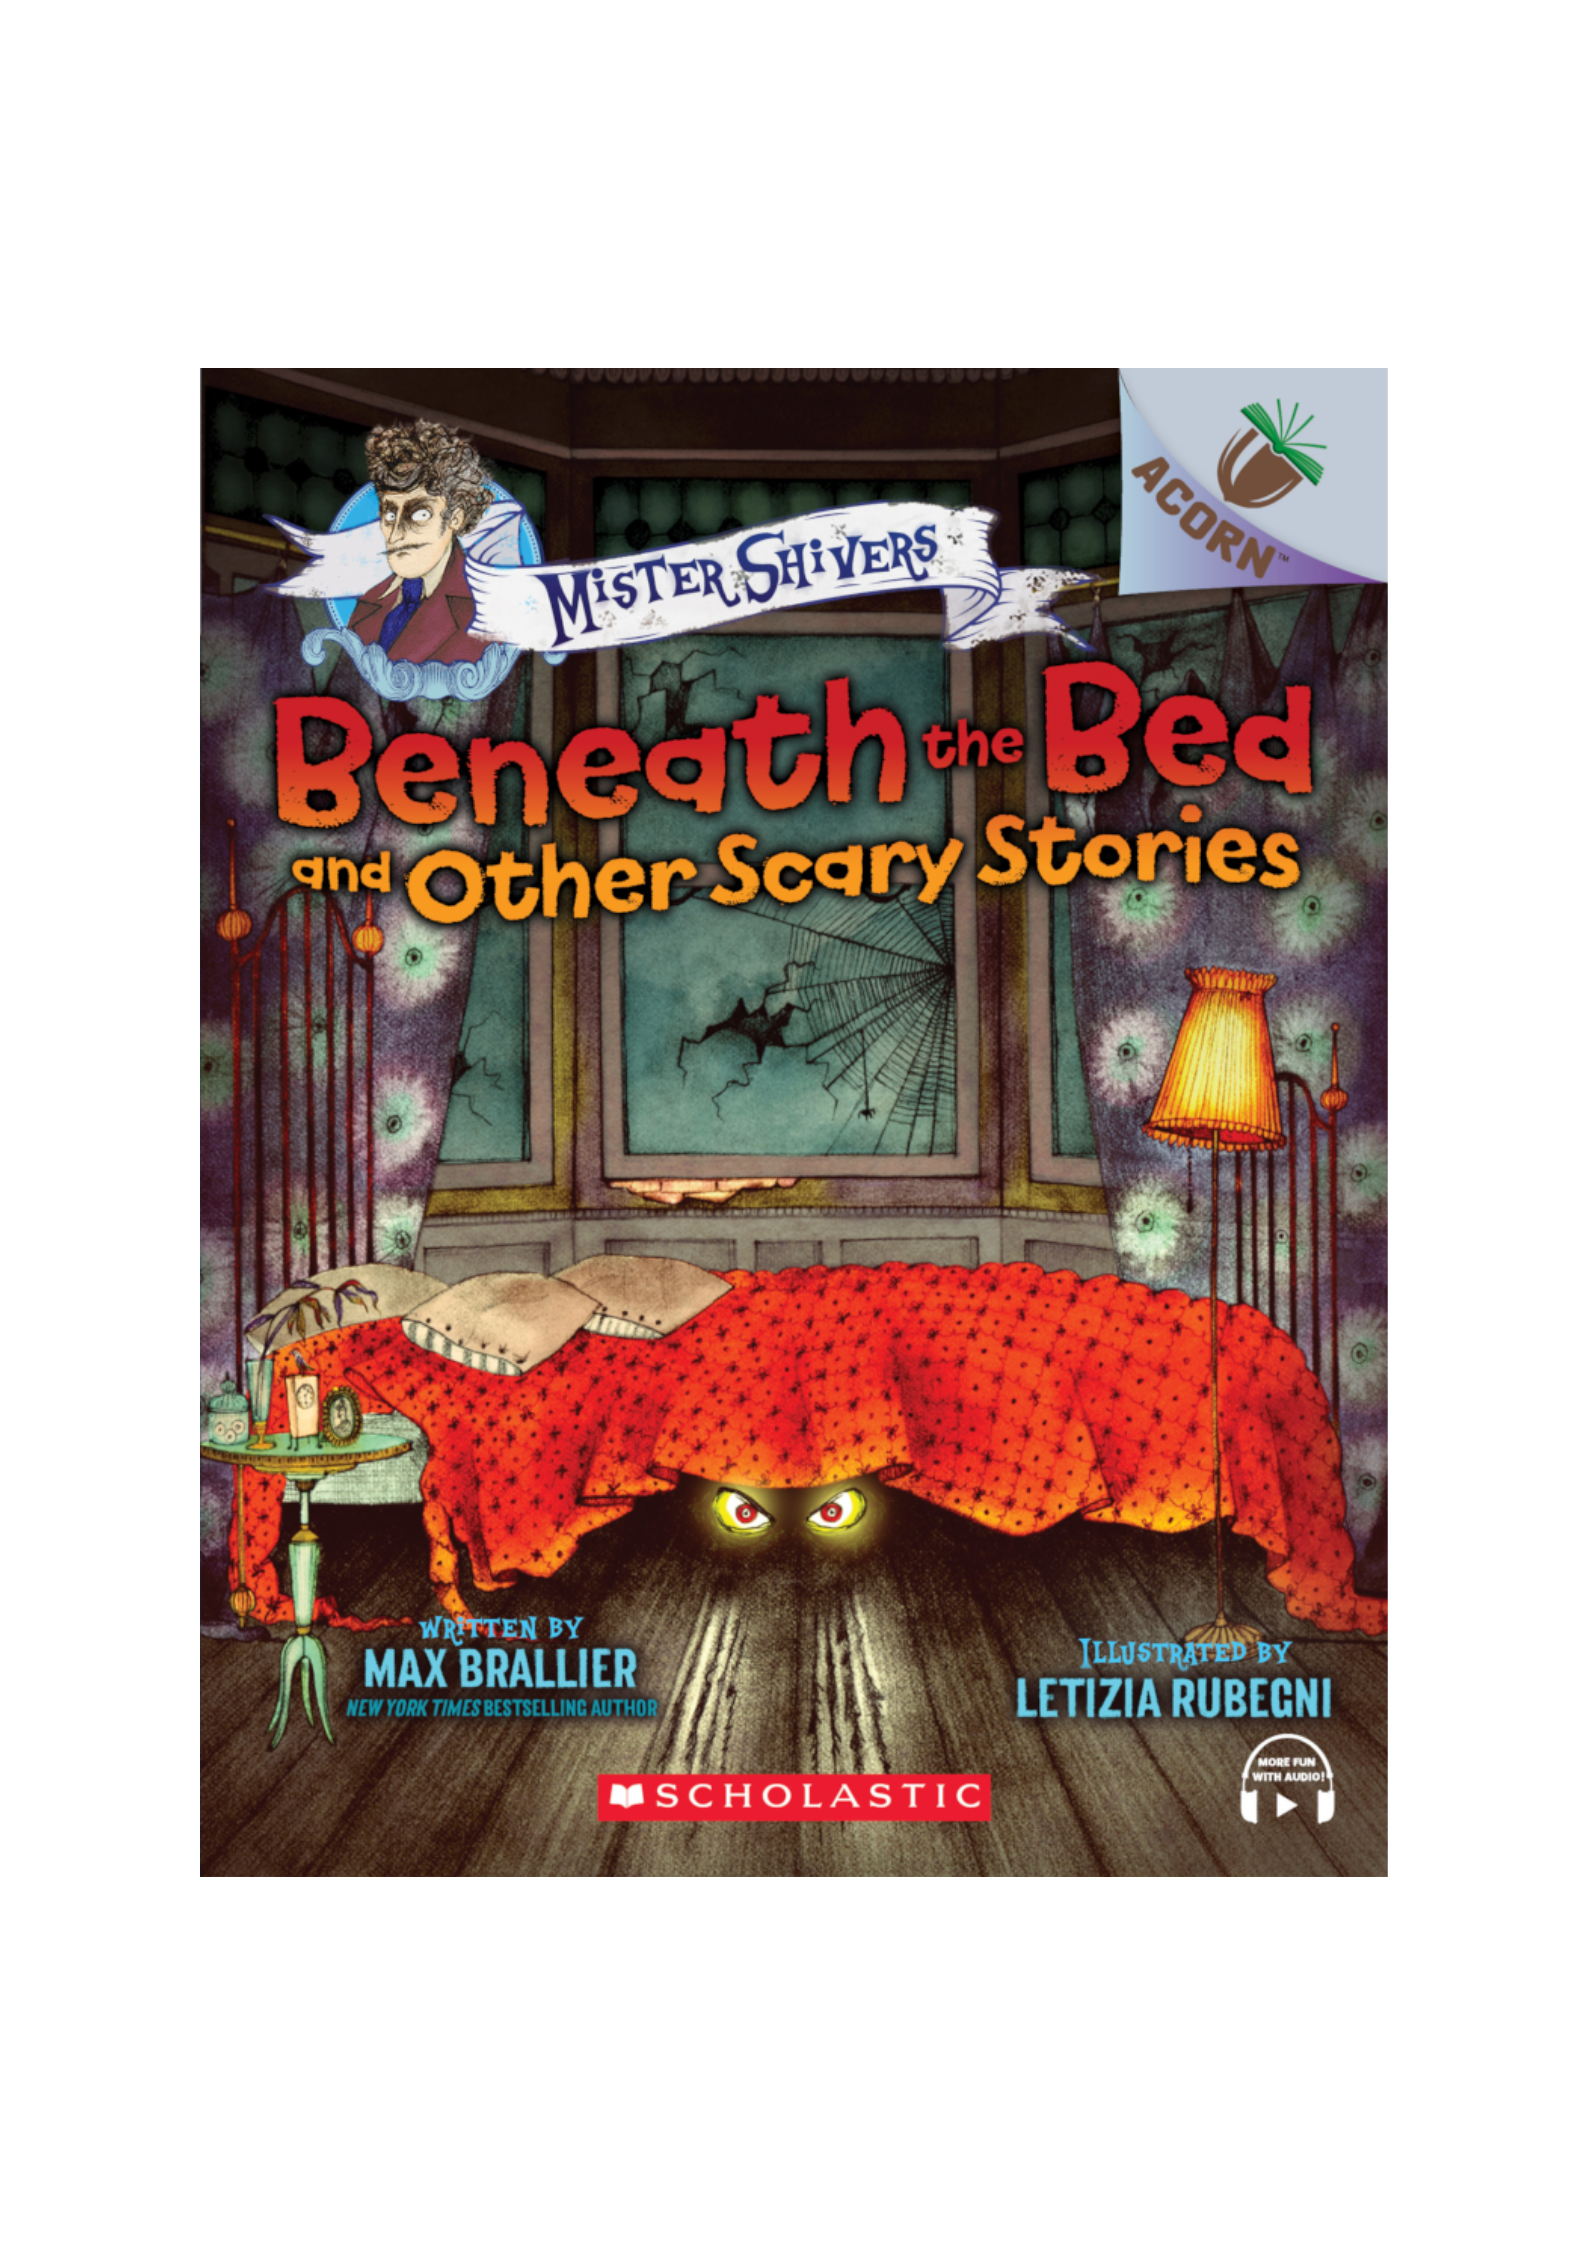 Acorn – Mister Shivers #1: Beneath the Bed and Other Scary Stories